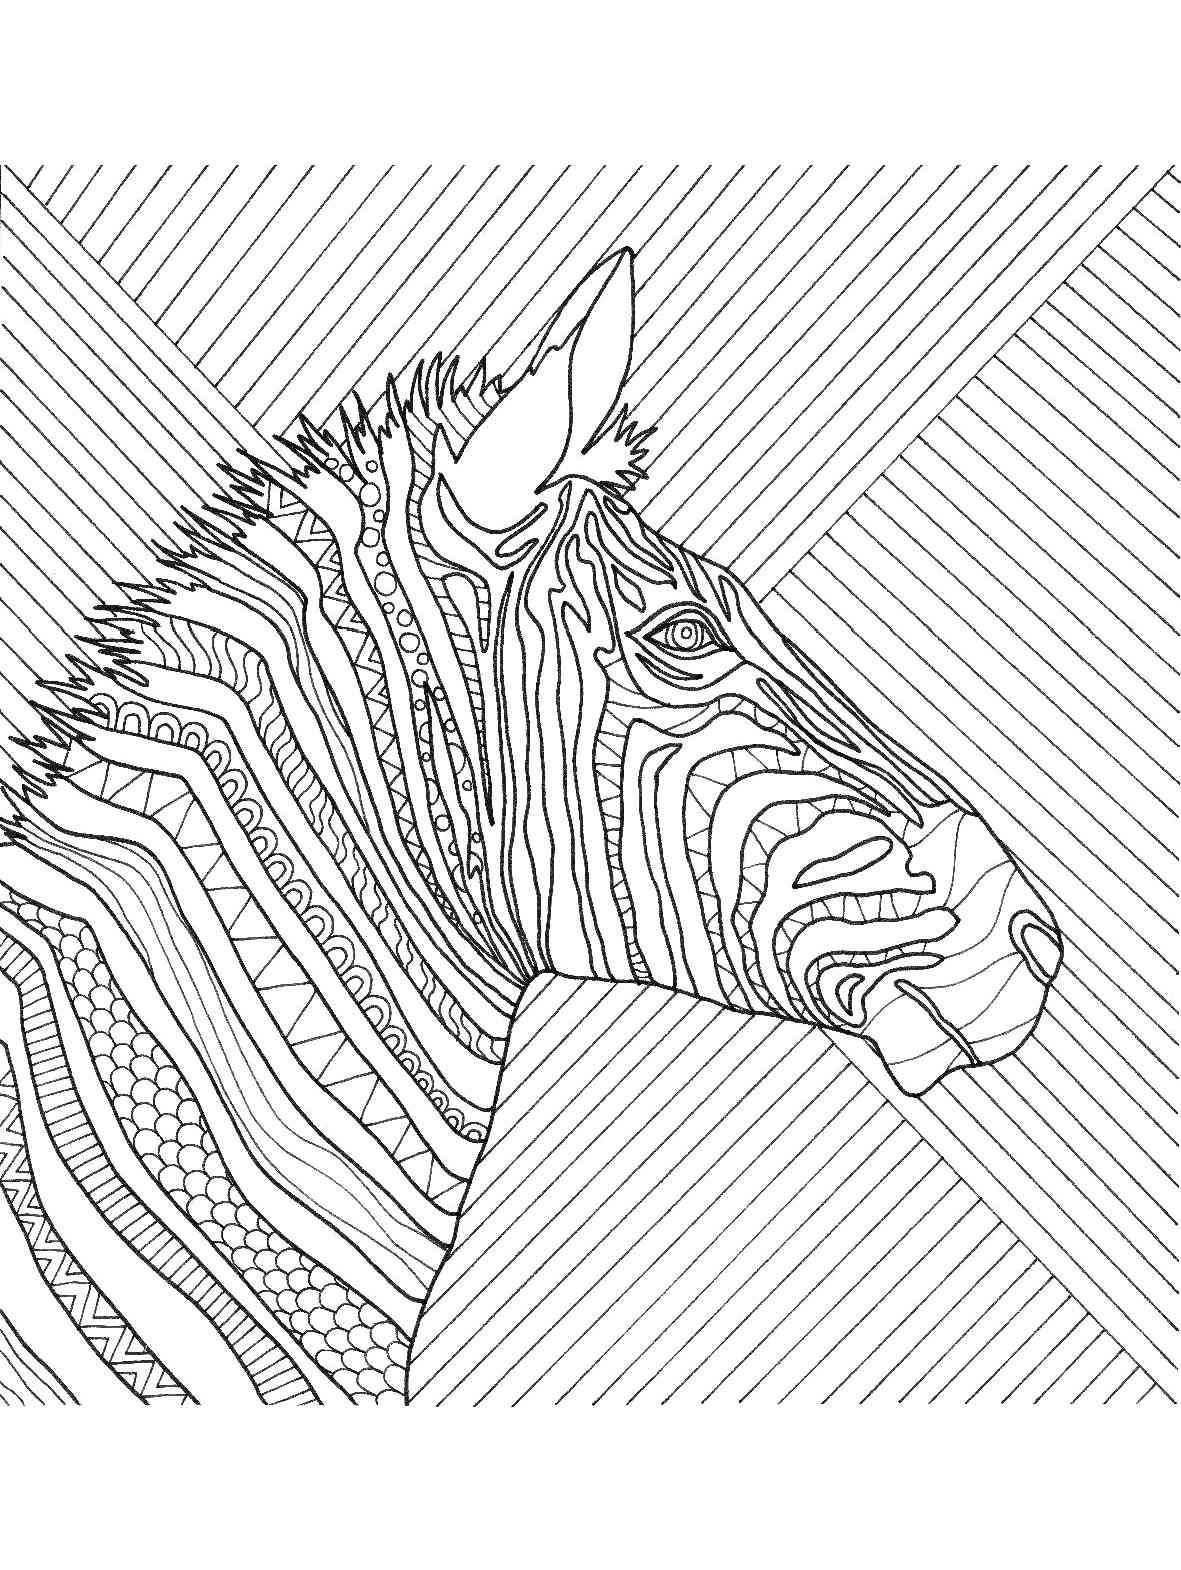 Zebra coloring pages for adults